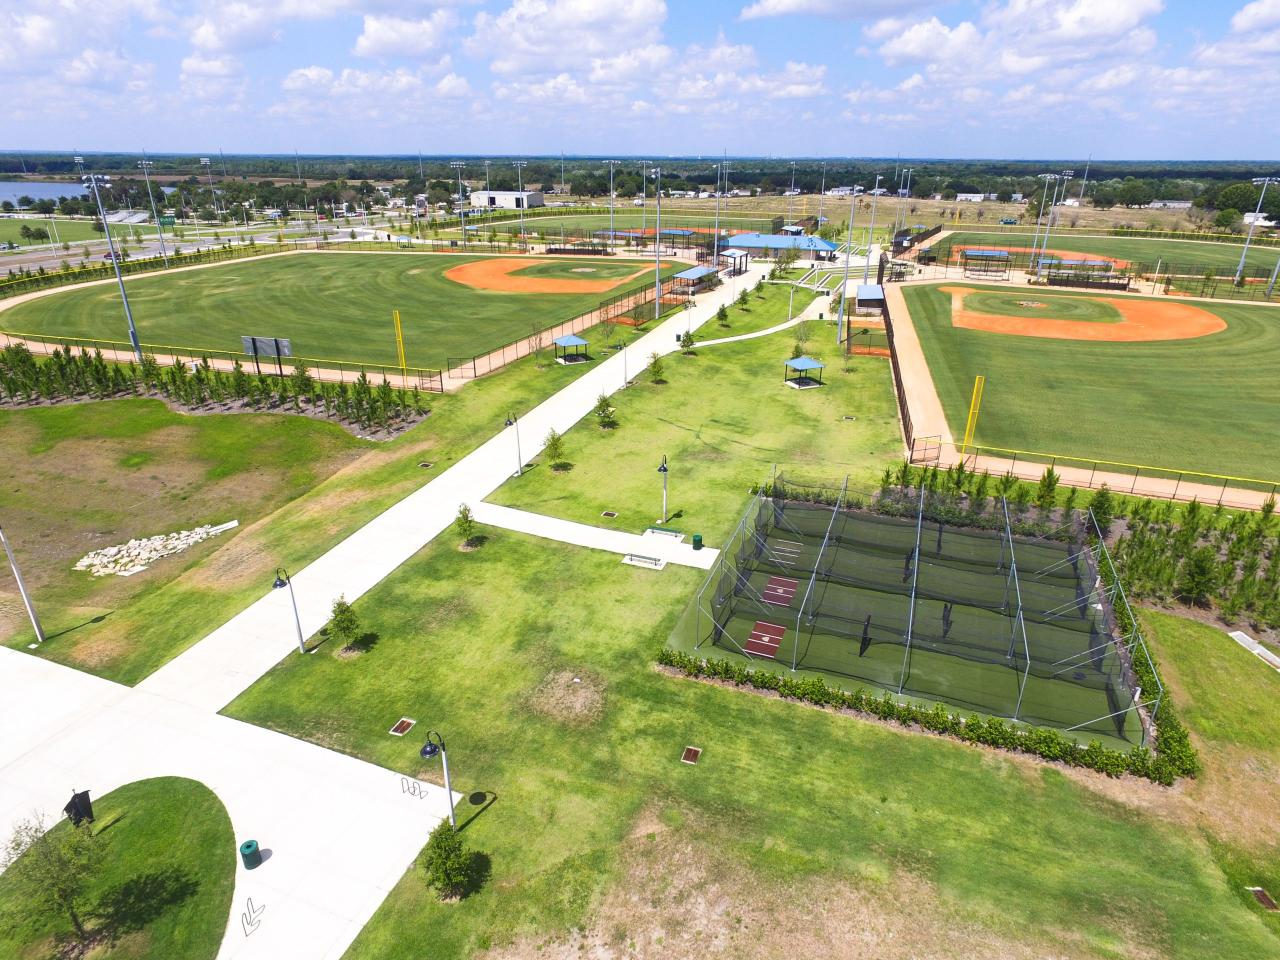 Lake Myrtle Sports Park: A Haven for Recreation and Sports Enthusiasts